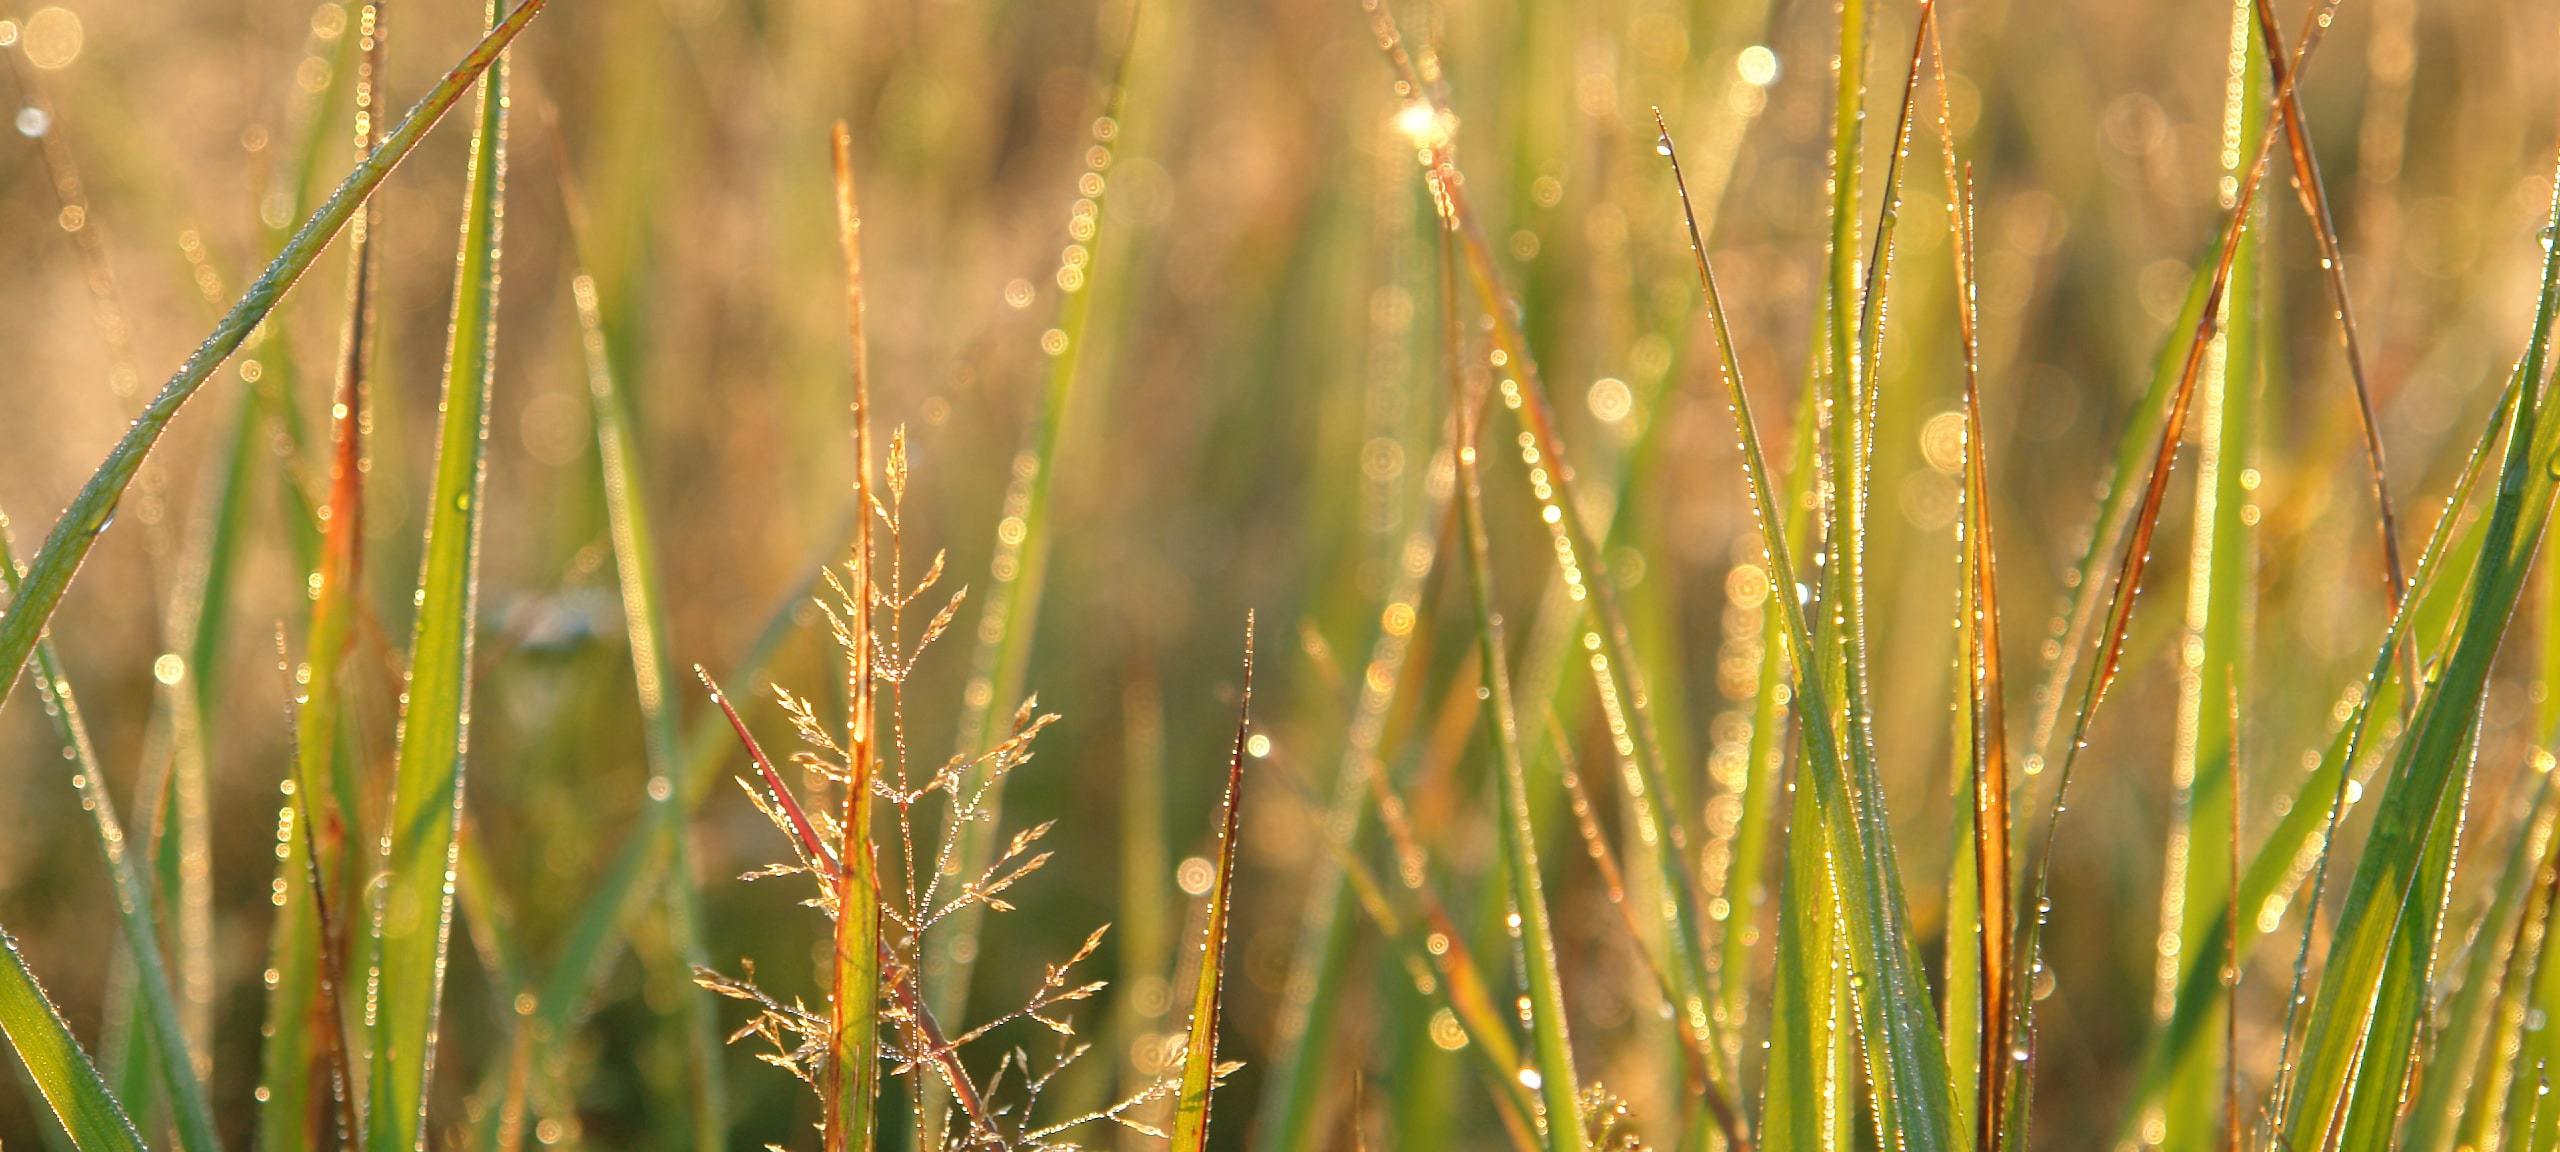 Sunny morning grass with dew